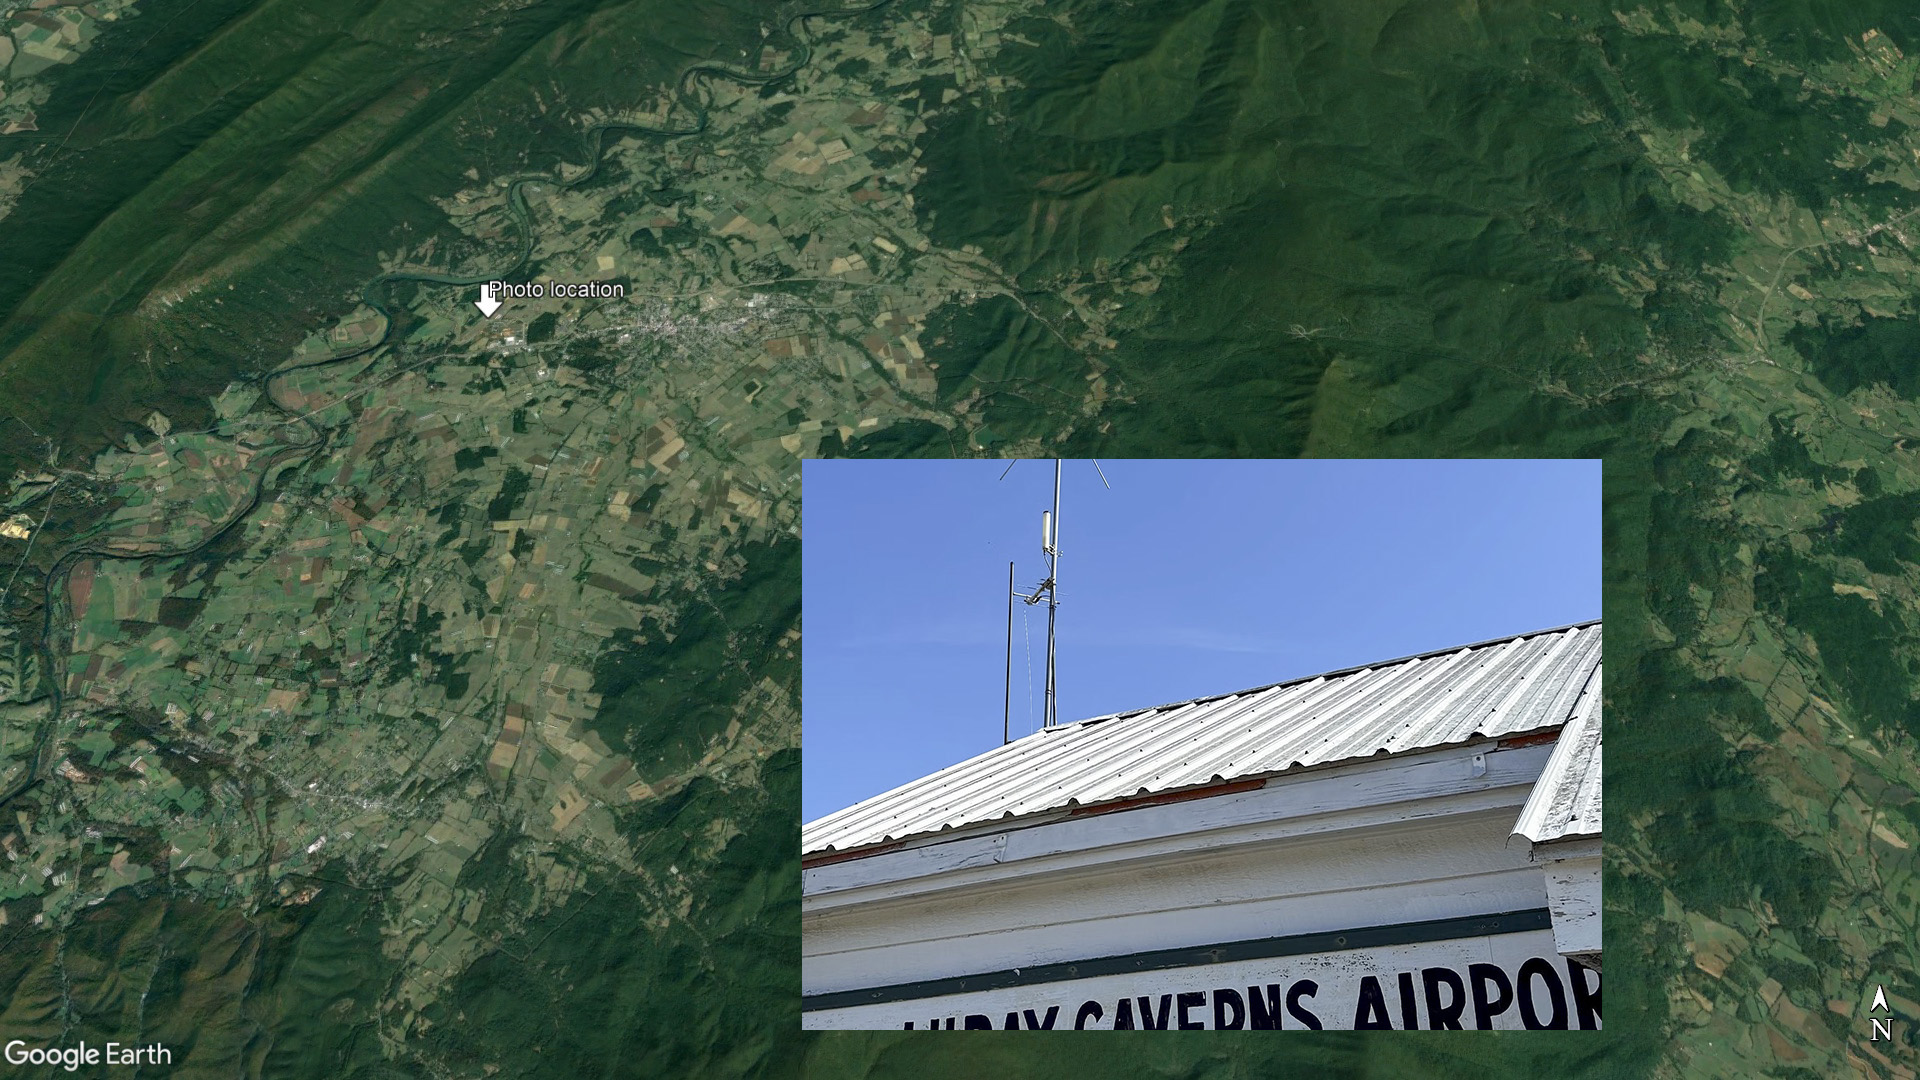 A Google Earth view marked to indicate where the inset photo of the uAvionix receiver installed by Civil Air Patrol volunteers was taken, at Luray Caverns Airport in Luray, Virginia. Google Earth image, inset image courtesy of uAvionix.